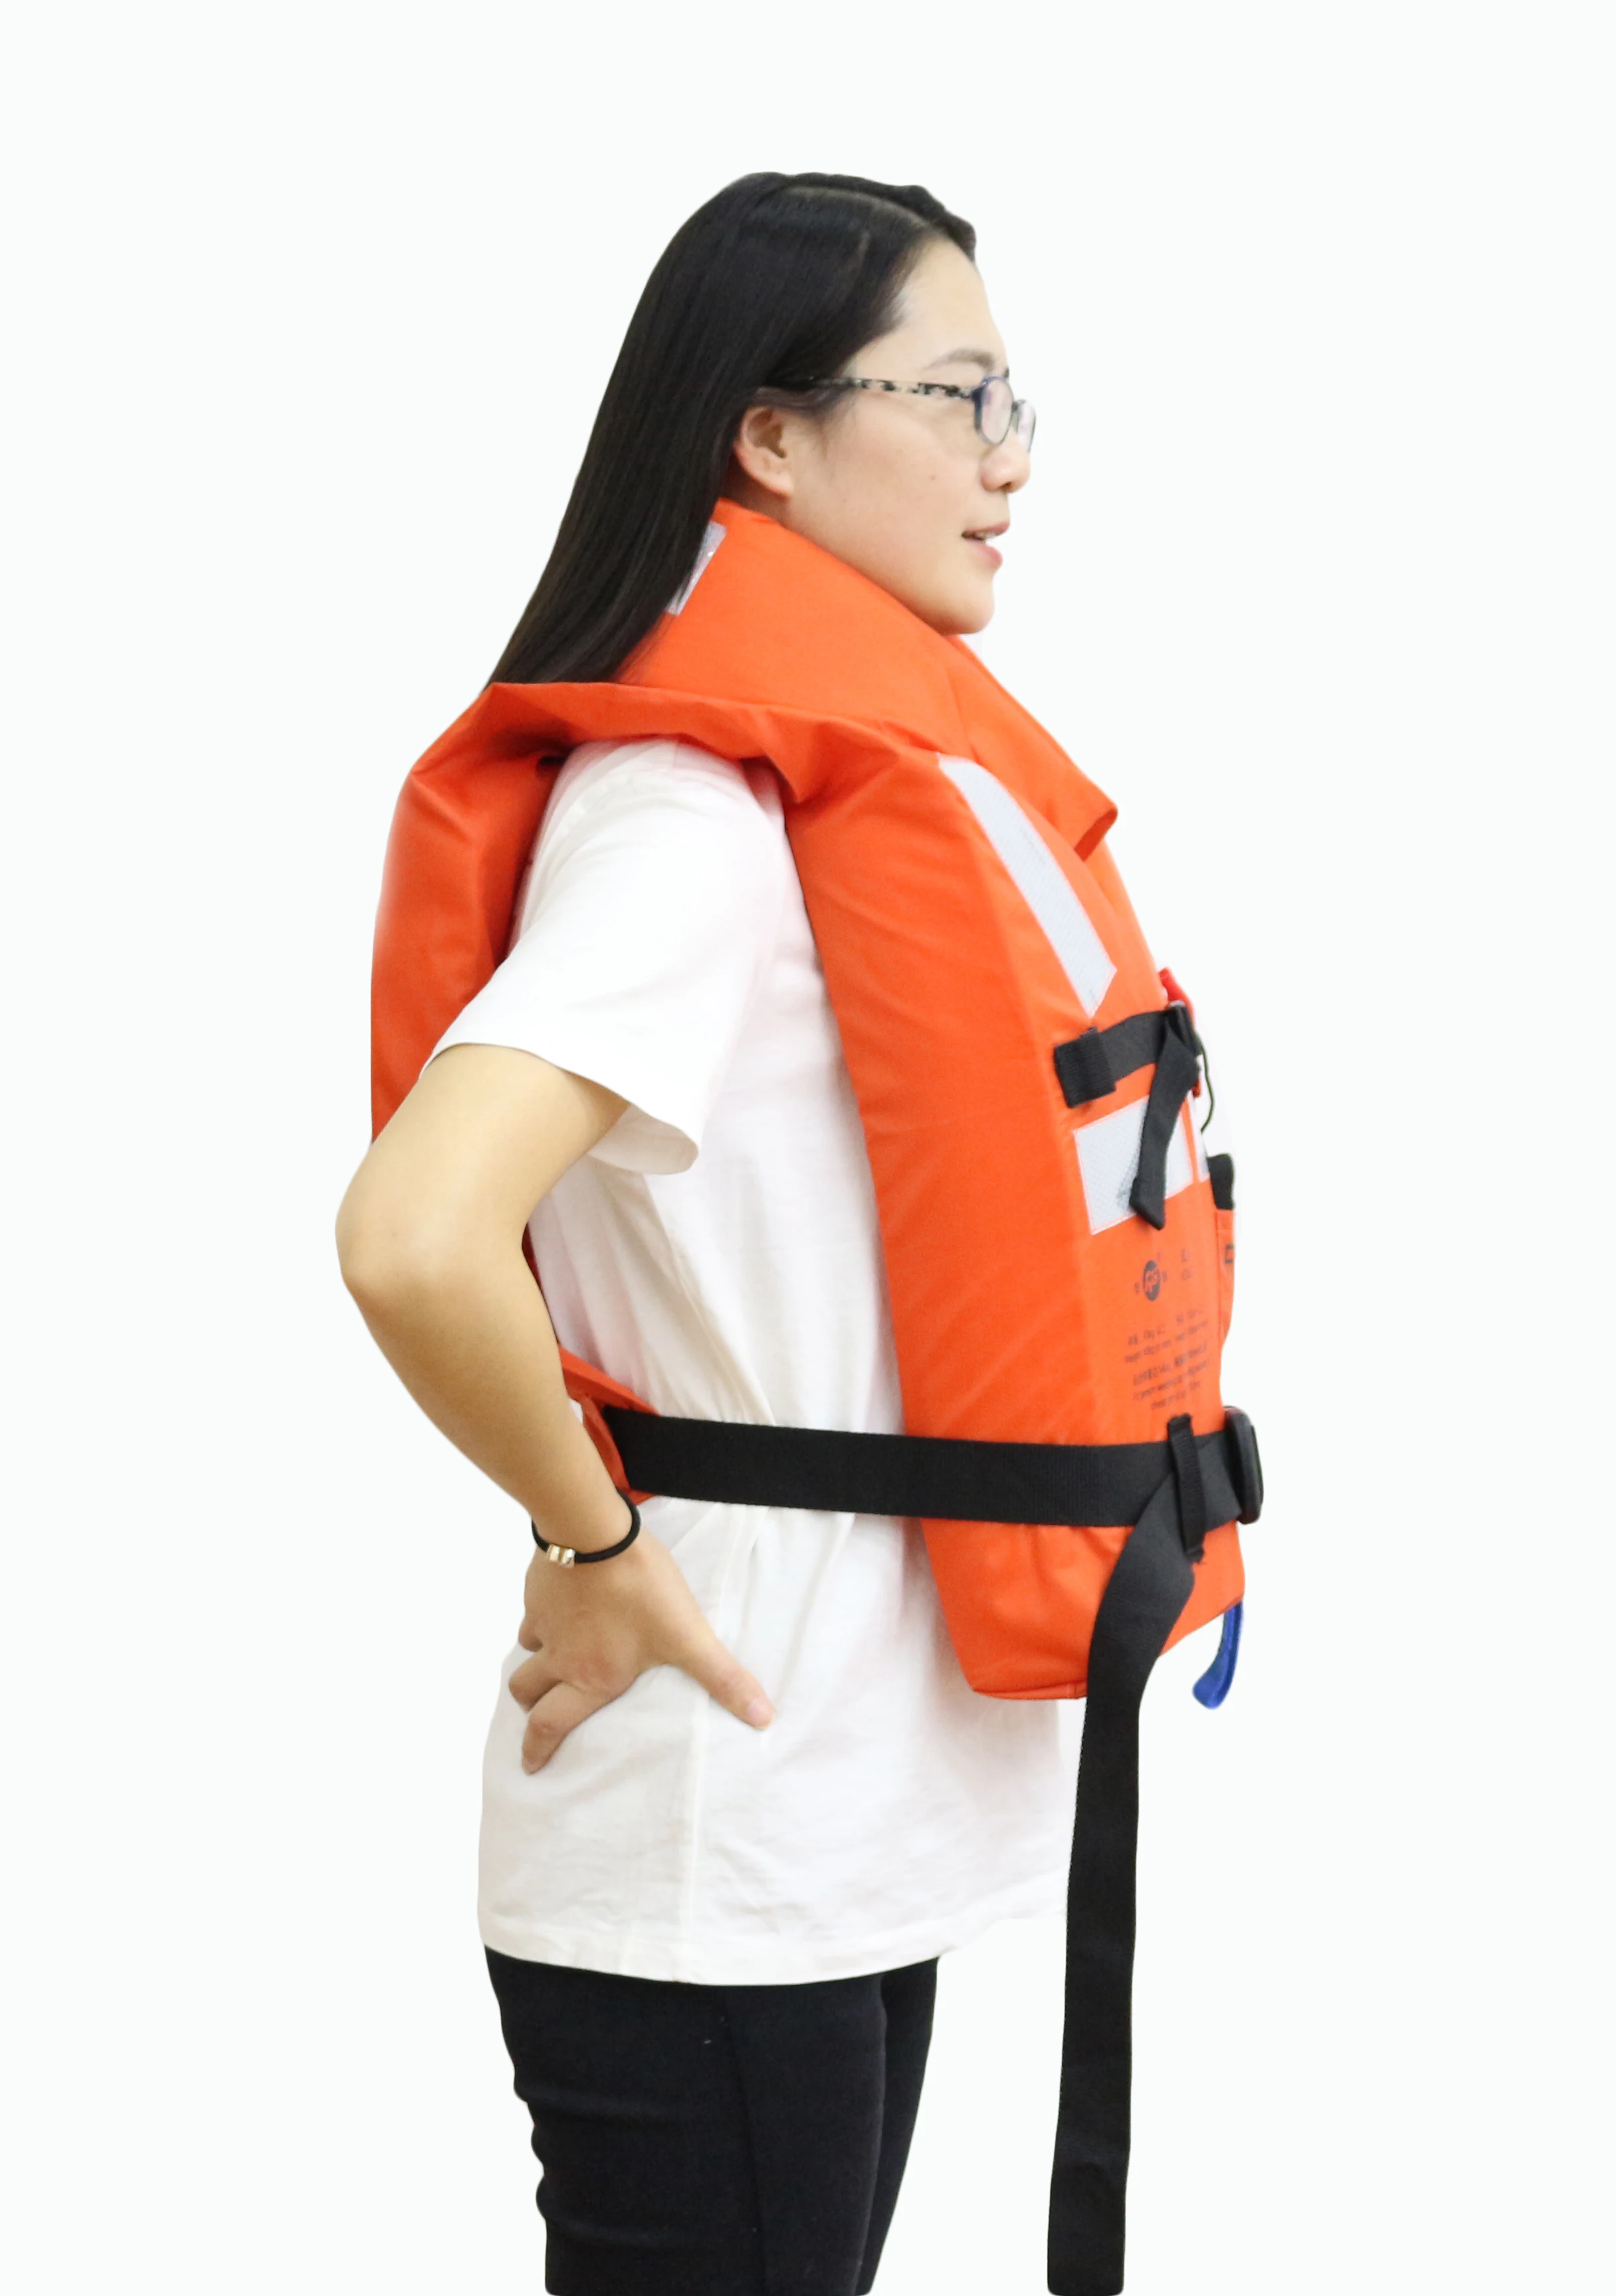 Solas Marine Ccs/ce Safety Life Vest - Buy Ccs/ce Safety Working Life ...